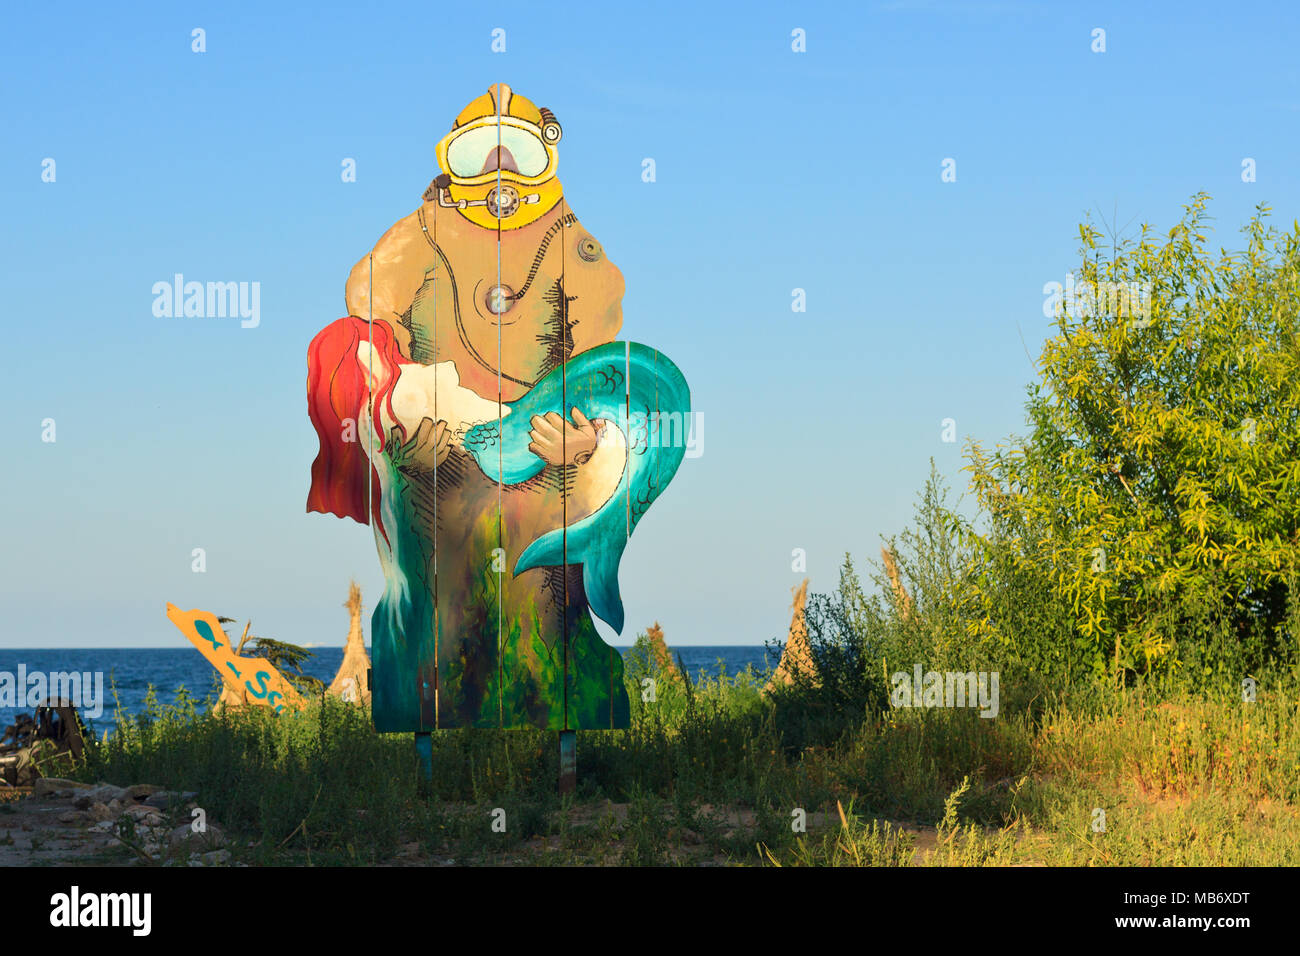 Funny summer decoration on the beach. Stock Photo